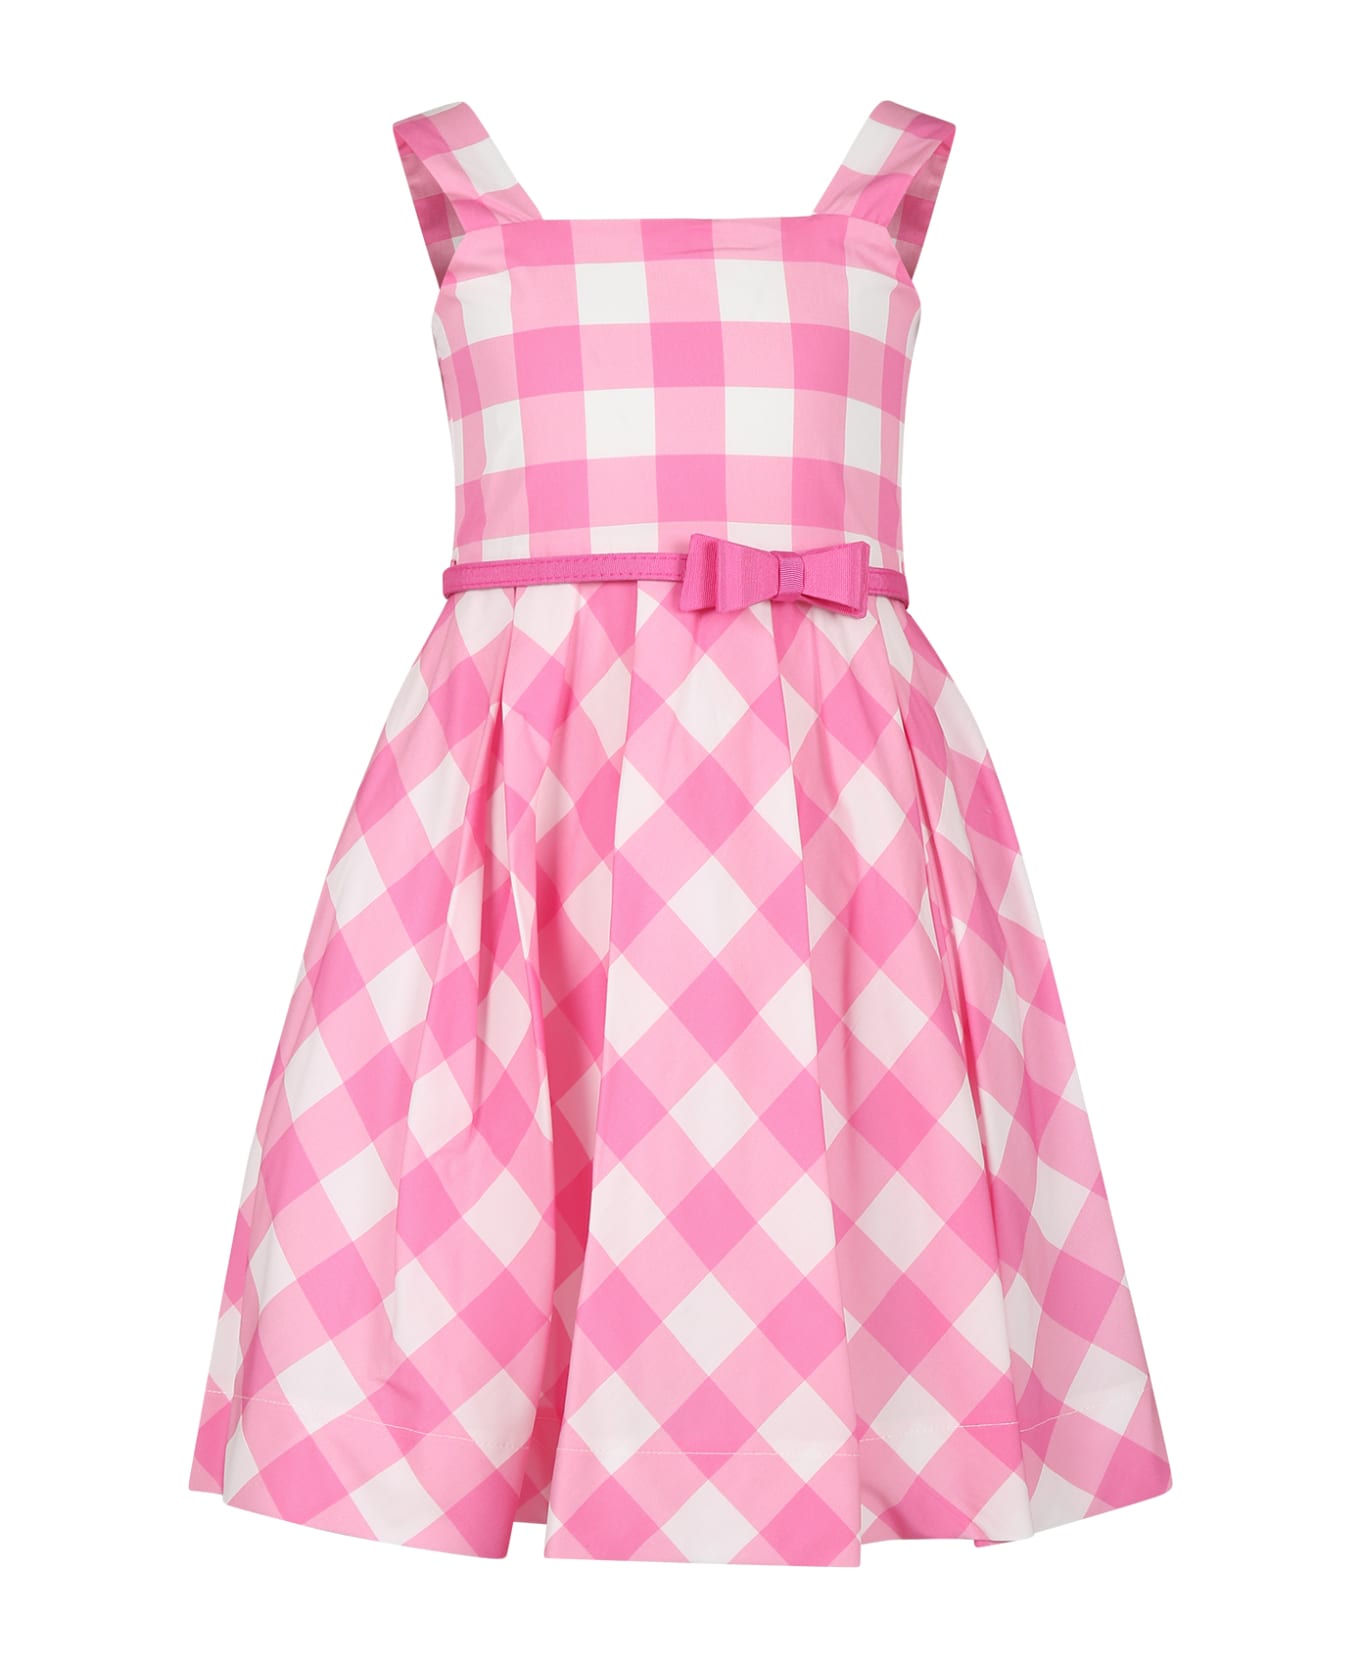 Monnalisa Pink Dress For Girl With Bow And Vichy Print - FUXIA